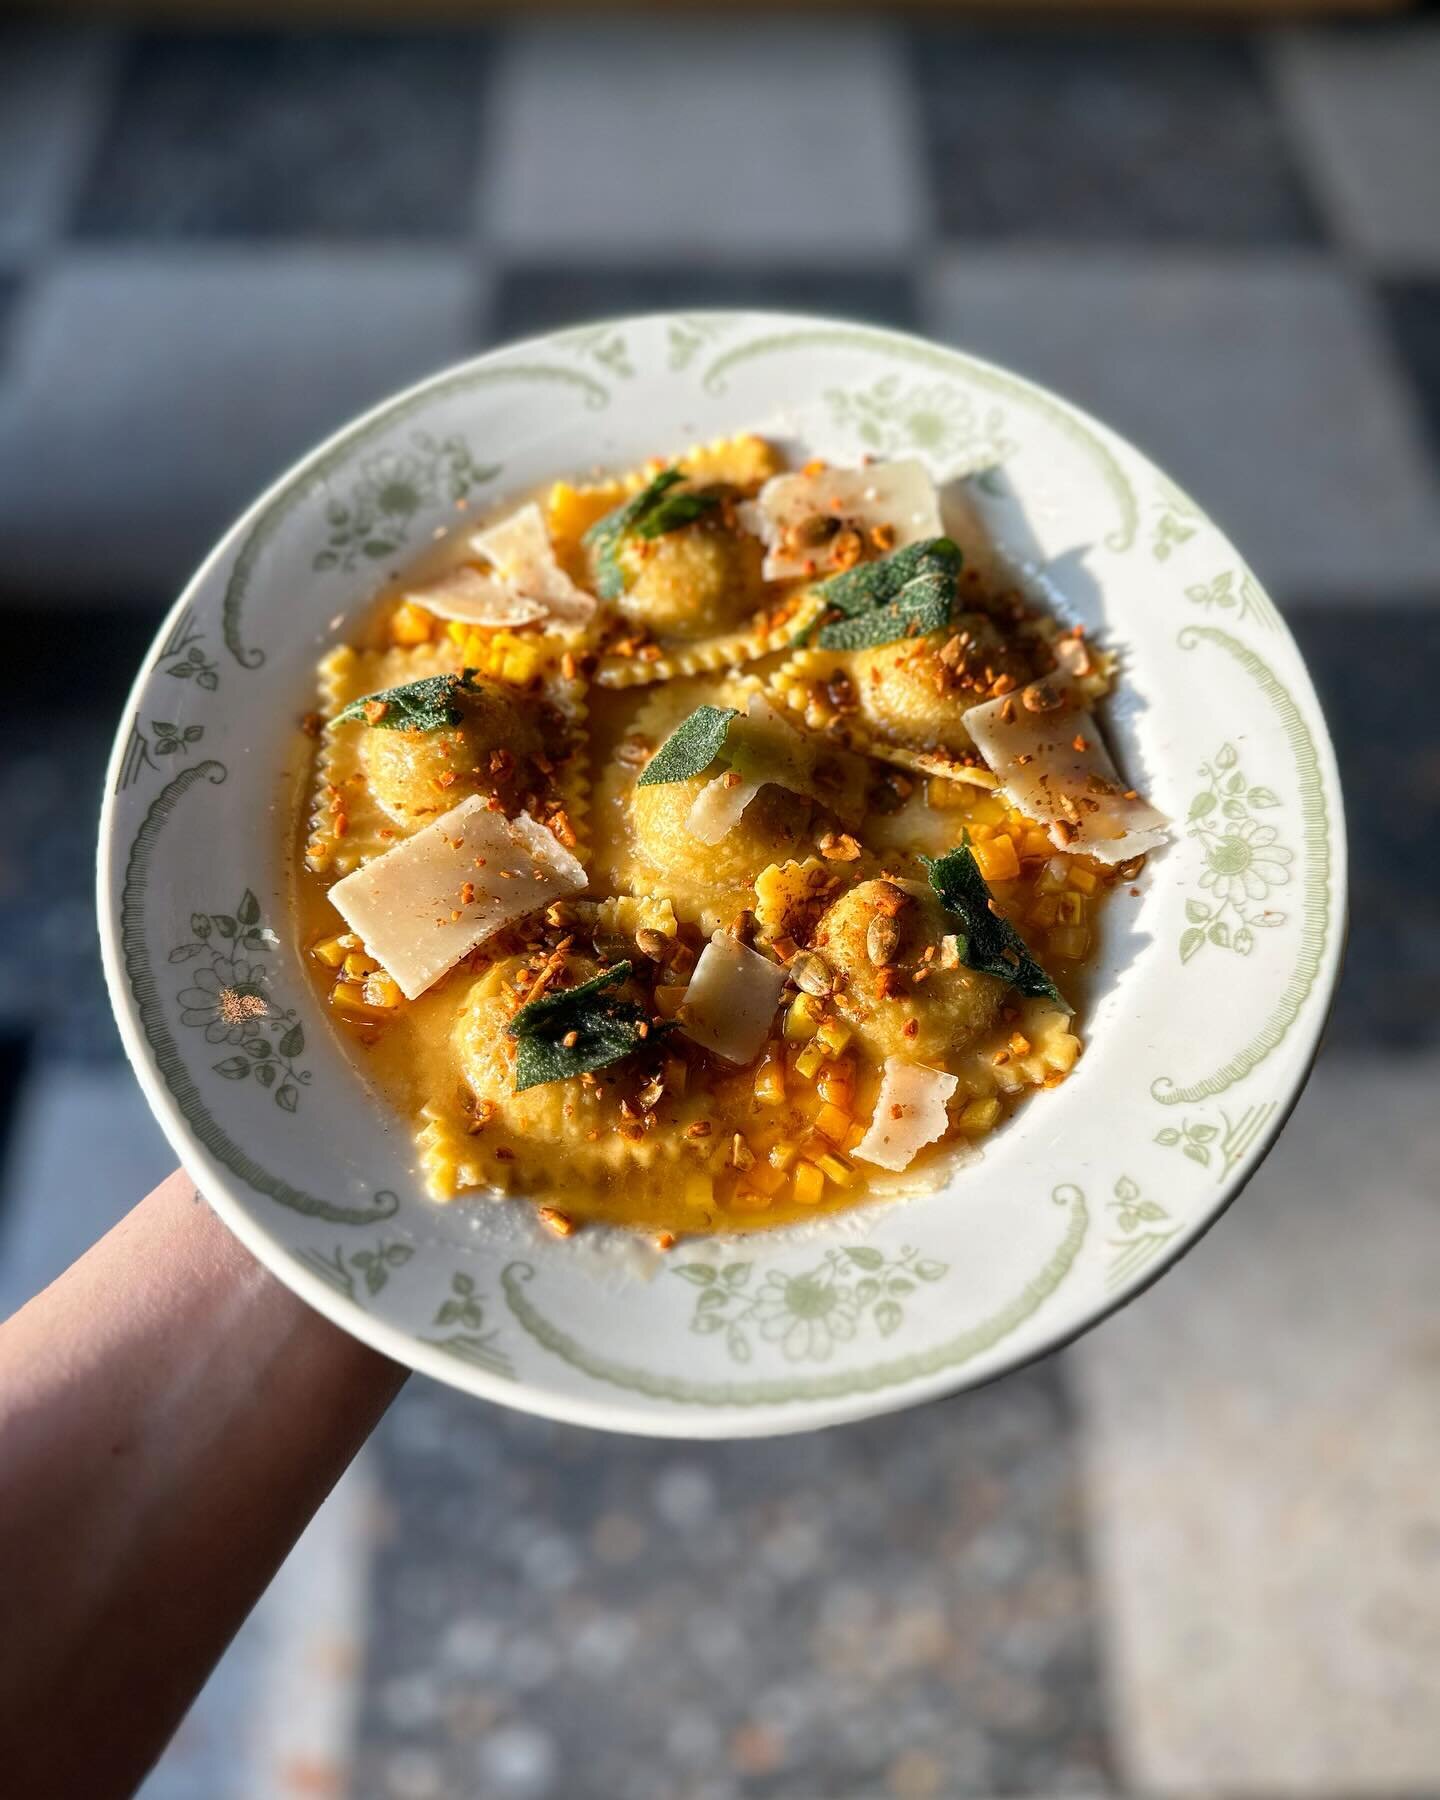 Happy #nationalravioliday from our house to yours! While we&rsquo;ve loved this dish, it is time to rotate and these beauties are coming off the menu soon! Come get some while you can! #handmade #fromscratch #ravioli